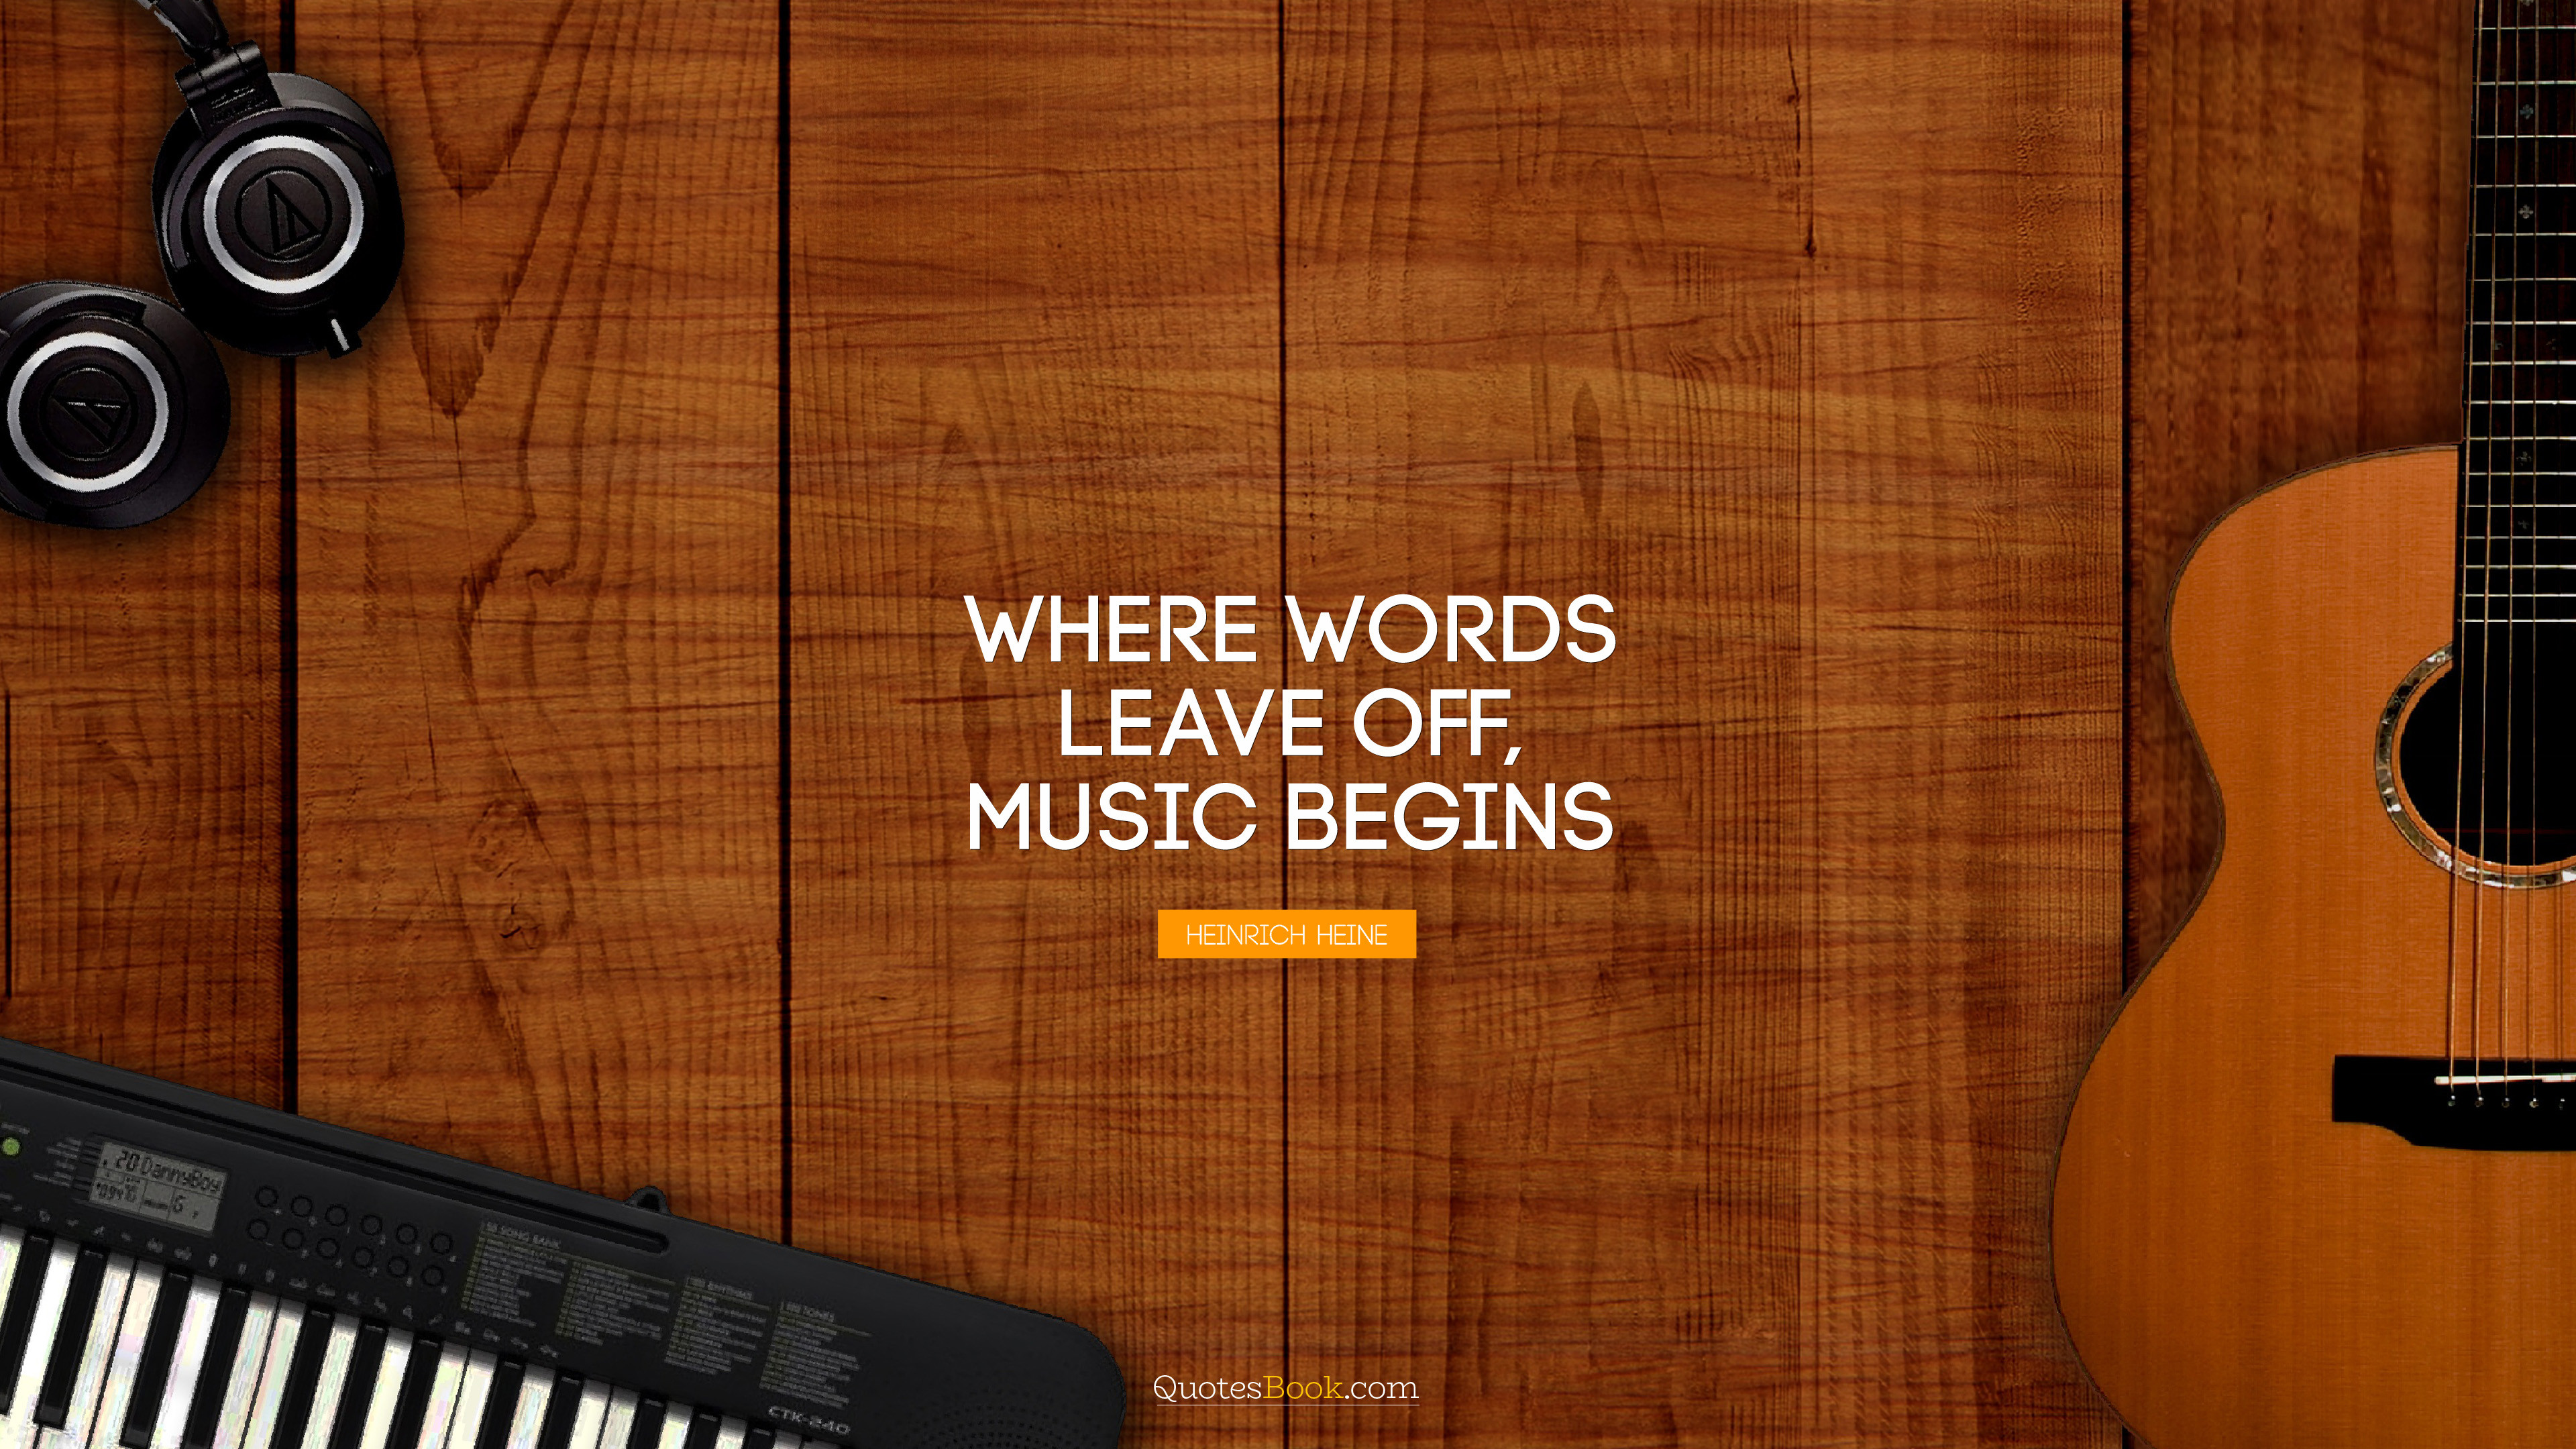 Where words leave off, music begins. - Quote by Heinrich Heine - QuotesBook